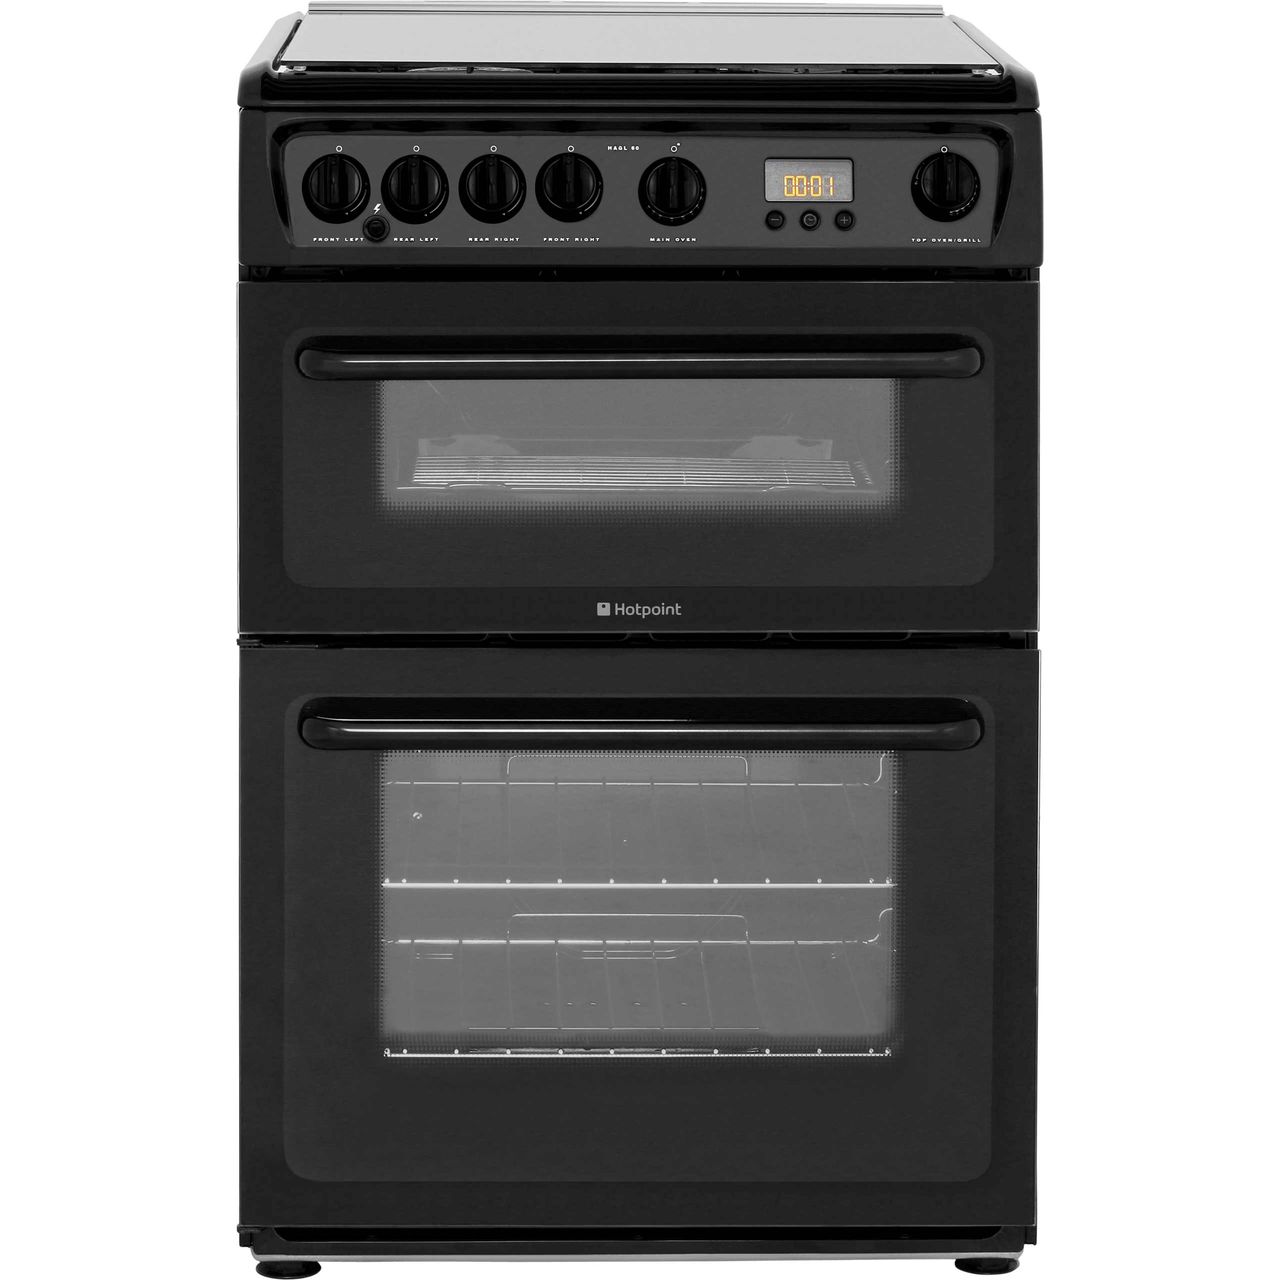 Hotpoint HAGL60K 60cm Gas Cooker Review